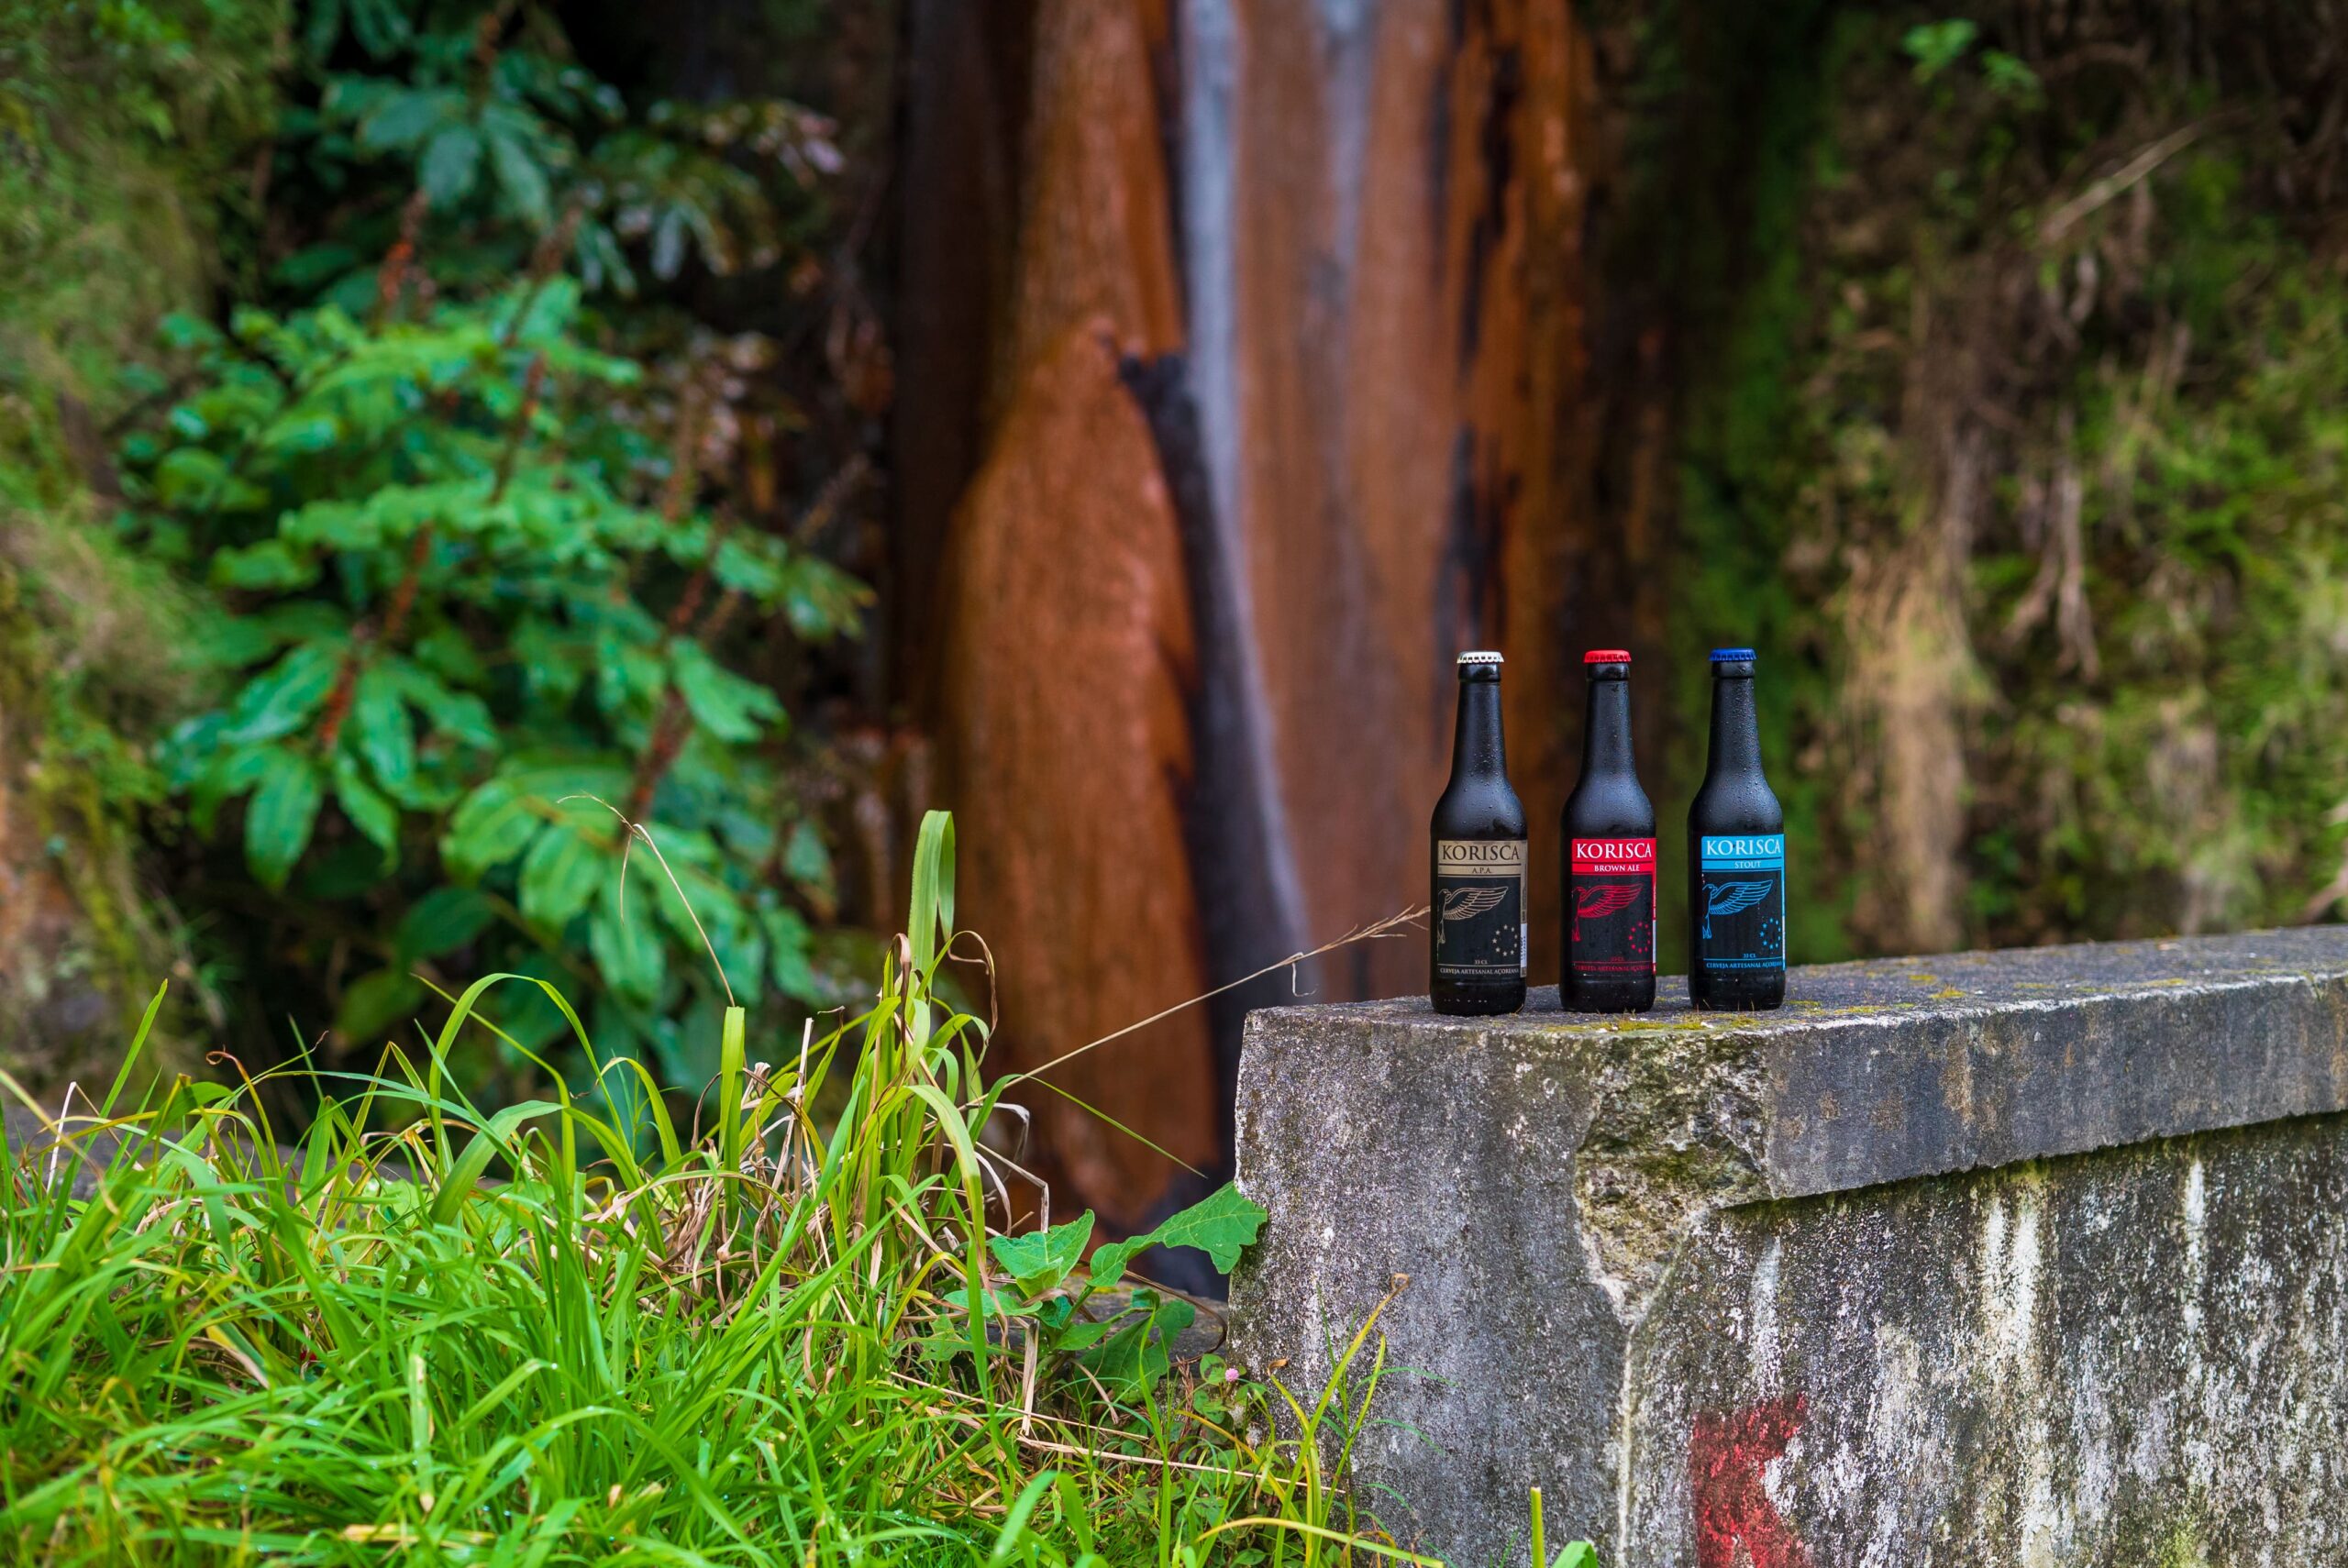 Azorean craft beer Korisca Clássica II (APA), Korisca Clássica I (Brown Ale) and Korisca Clássica III (Stout), on the wall, next to the green vegetation, and in the background the Ribeira Quente waterfall, Ribeira Quente, Povoação, São Miguel, Azores.